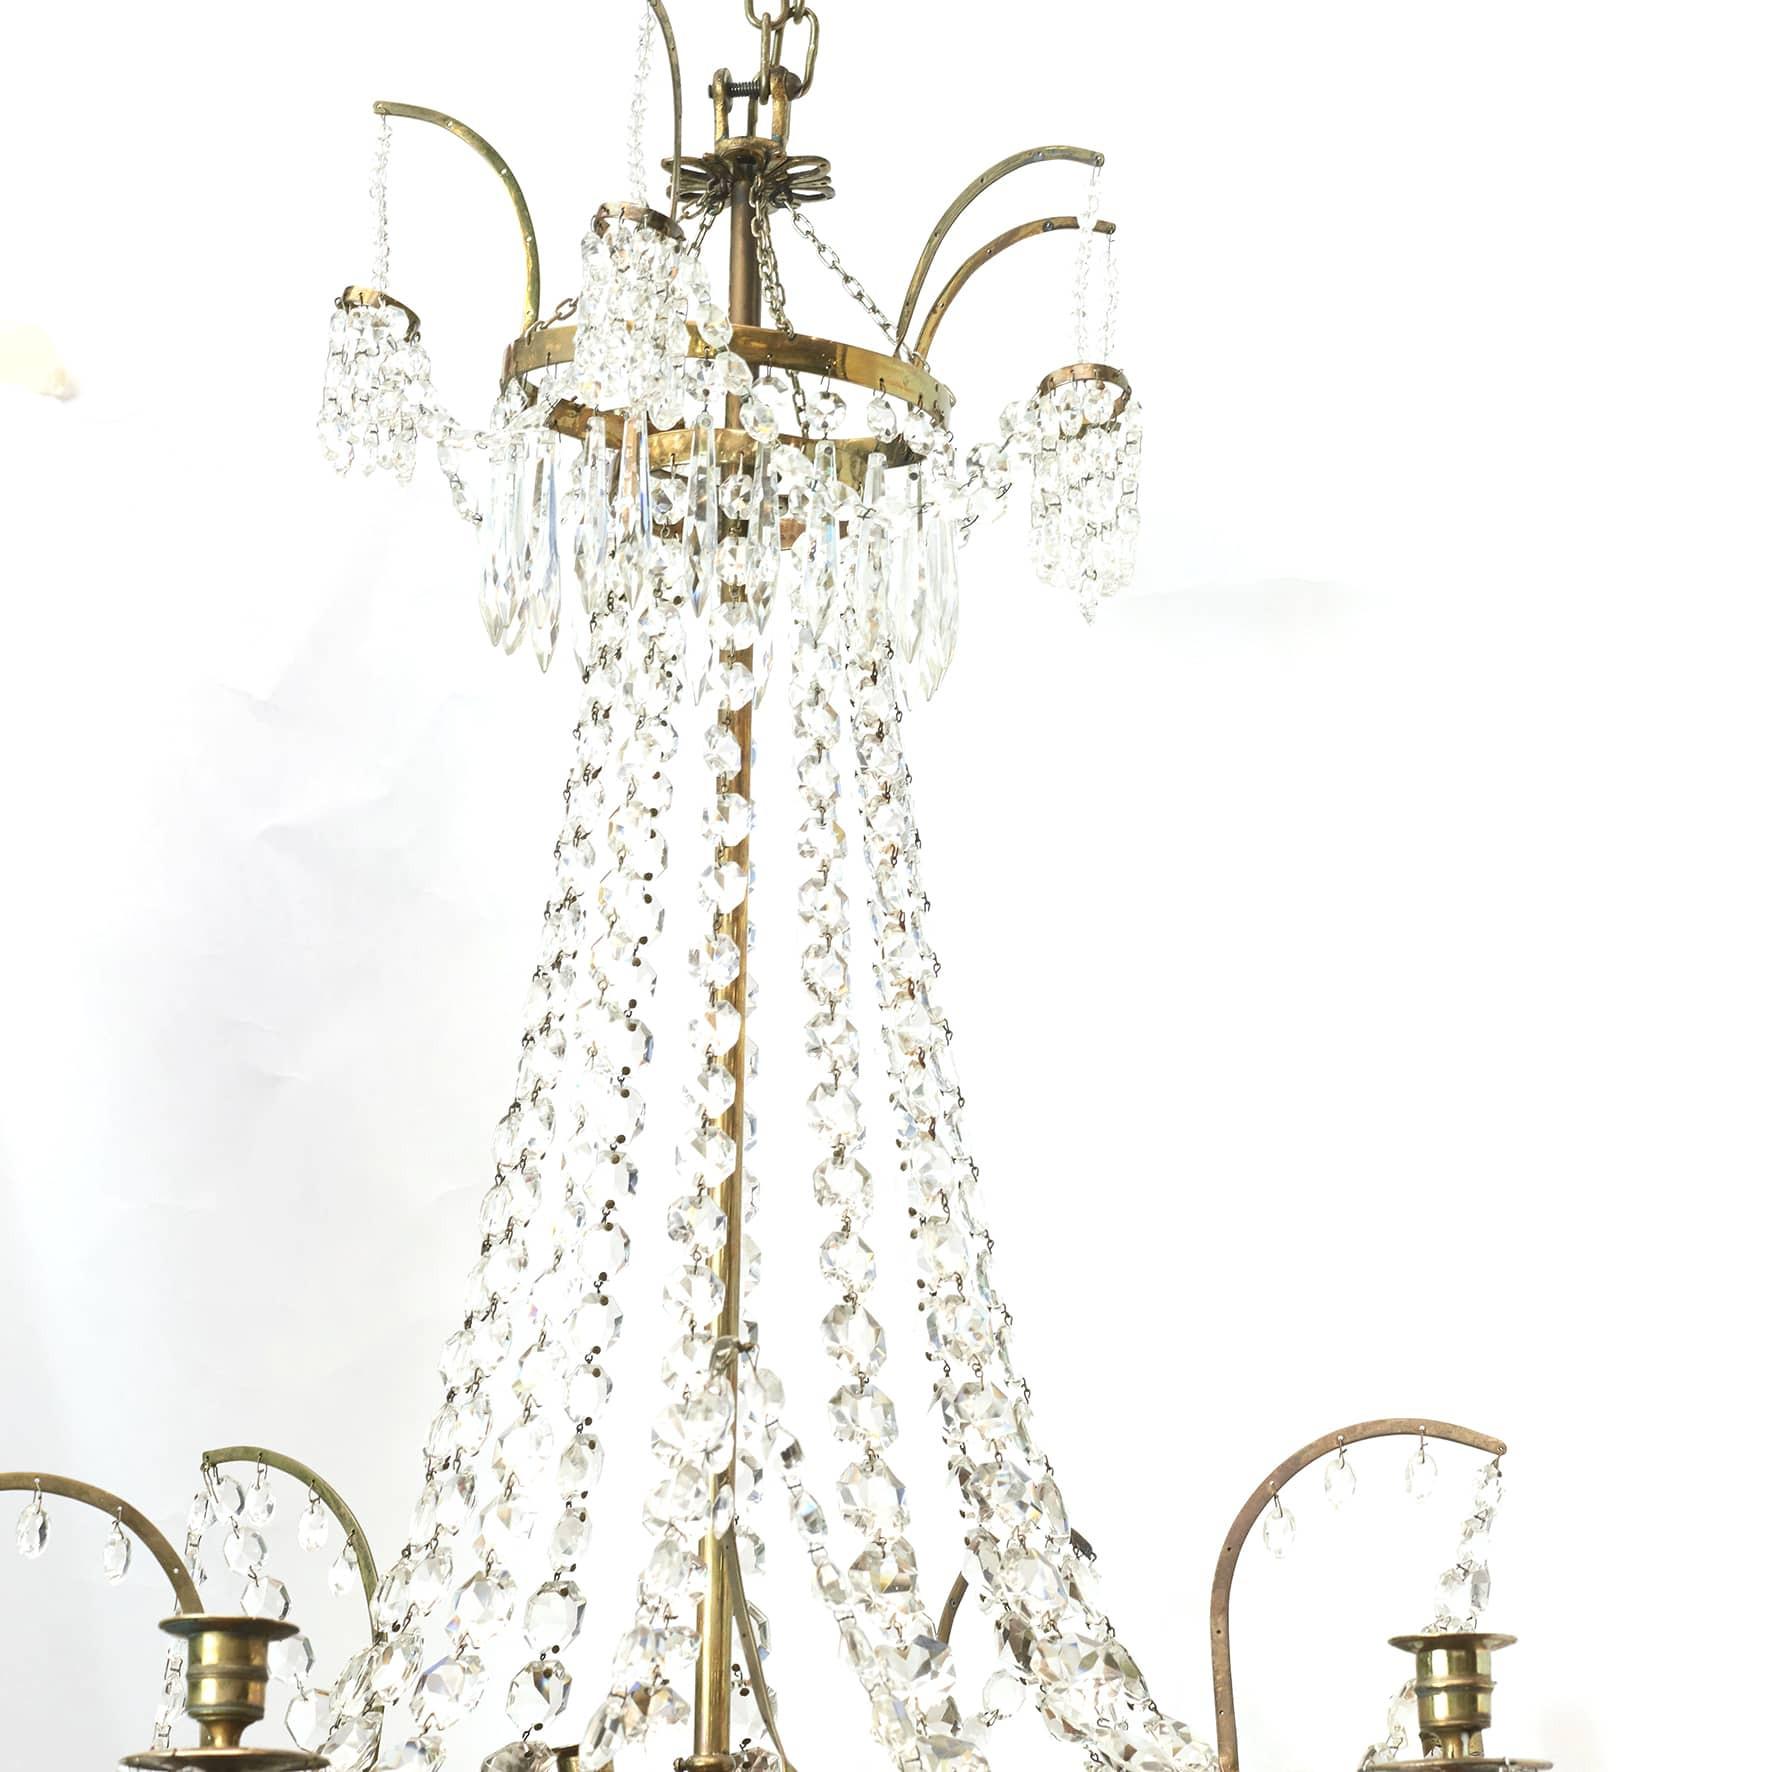 Elegant Louis XVI chandelier with crystal Prisms.

Polished brass frame with 6 light arms and reduced rounding with blue glass.
Denmark 1780 - 1800.

Can be electrified.